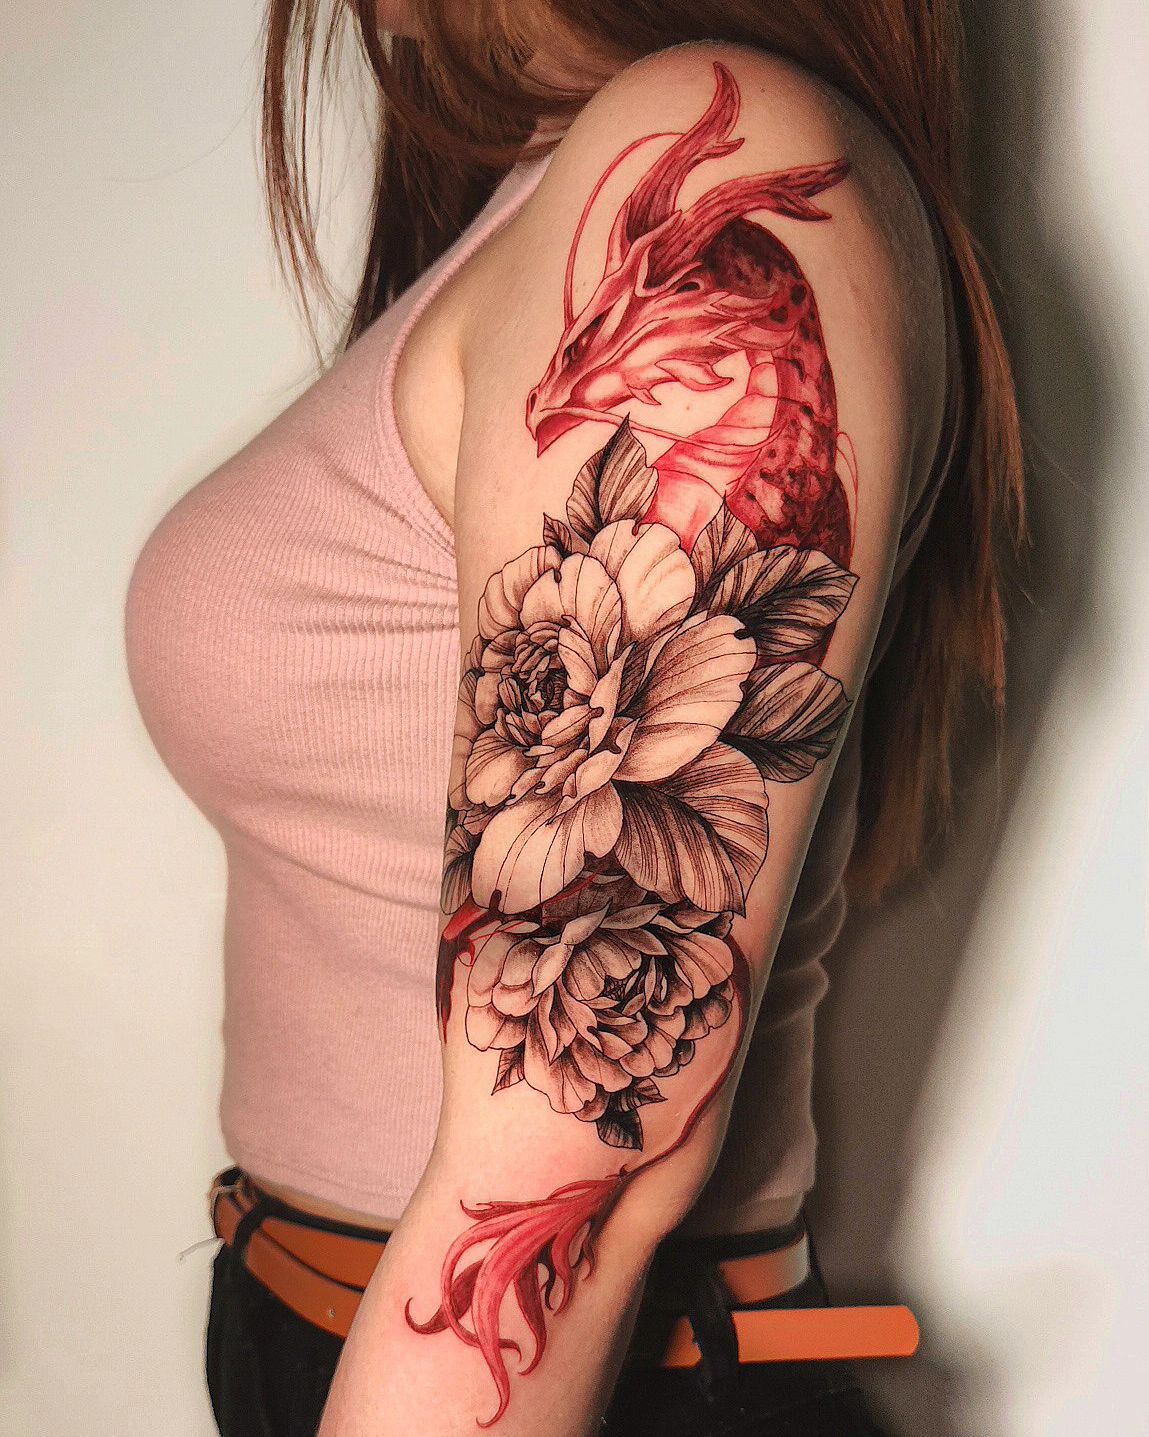 Red Dragon Tattoo with Black Flowers on Arm